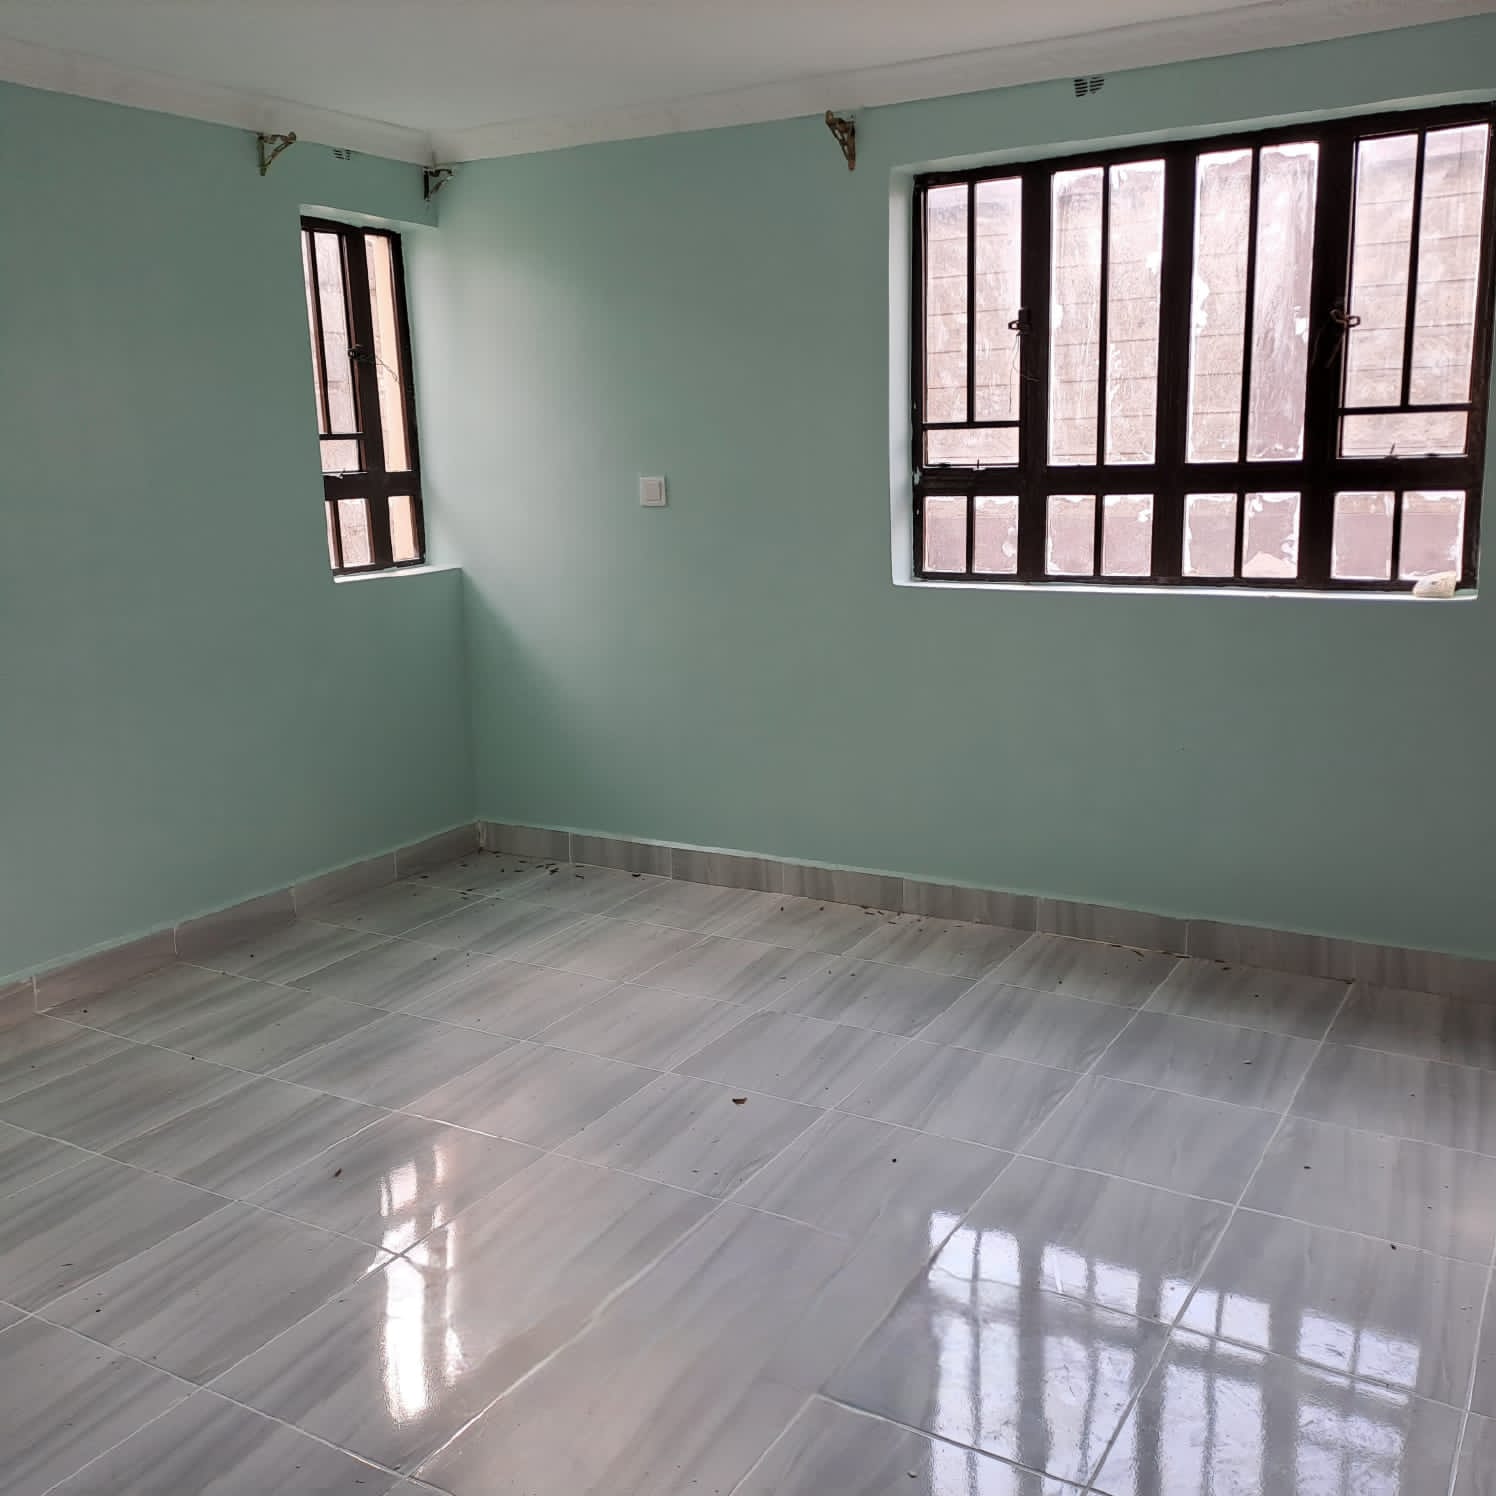 Spacious 4 bedrooms all ensuite with study room on an 1/8th acre with ready freehold title deeds. A 10 unit estate located in Rimpa, RONGAI Musilli Homes